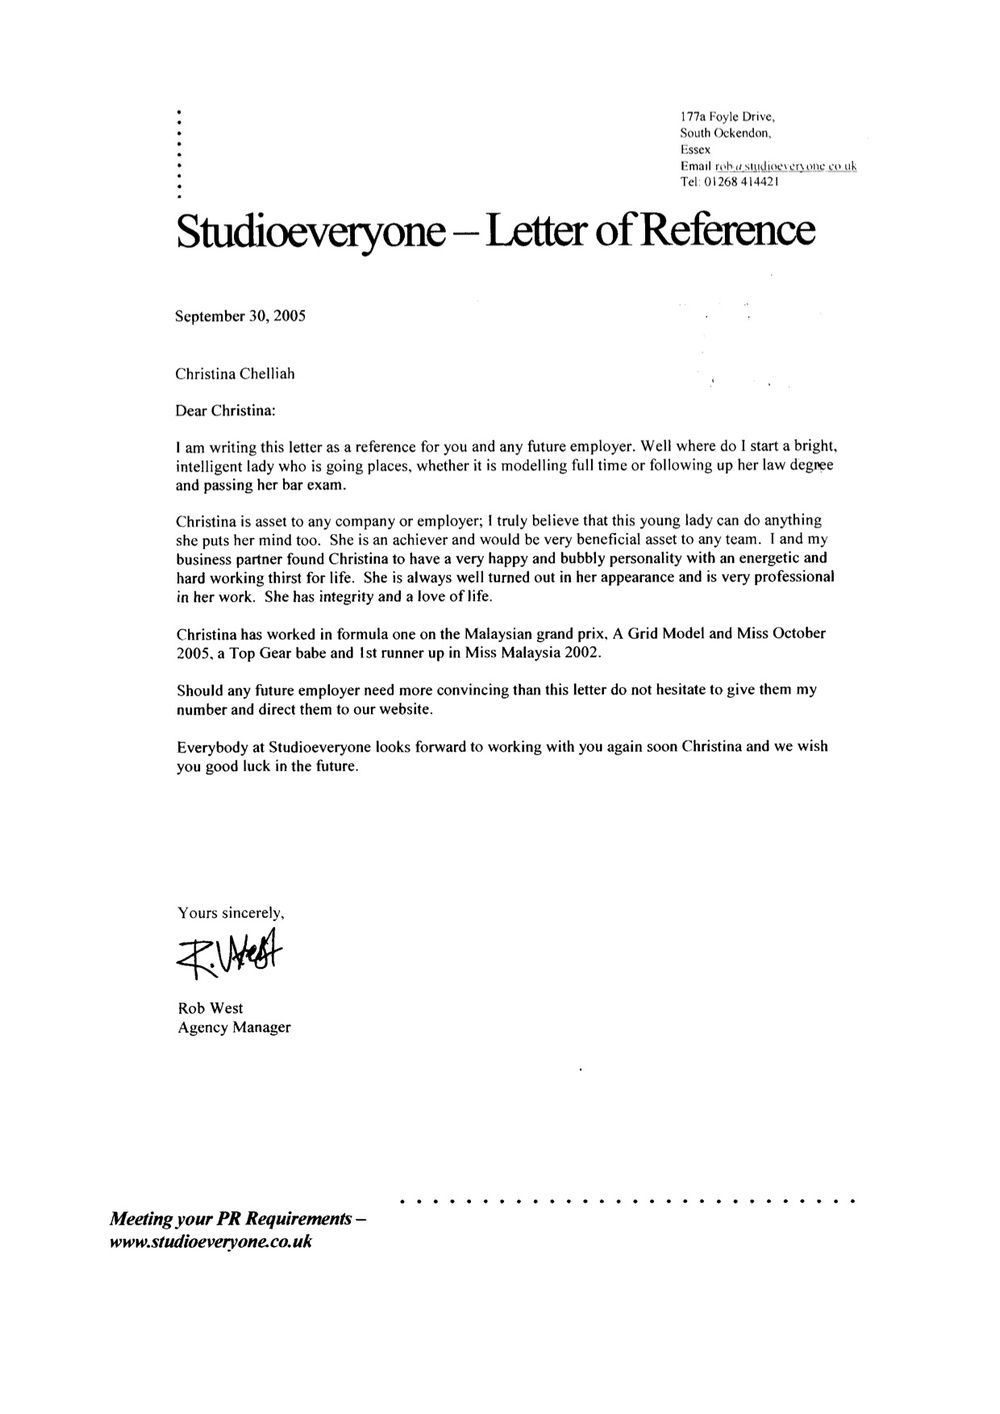 Recommendation Letter For Property Manager Debandje for size 1000 X 1414